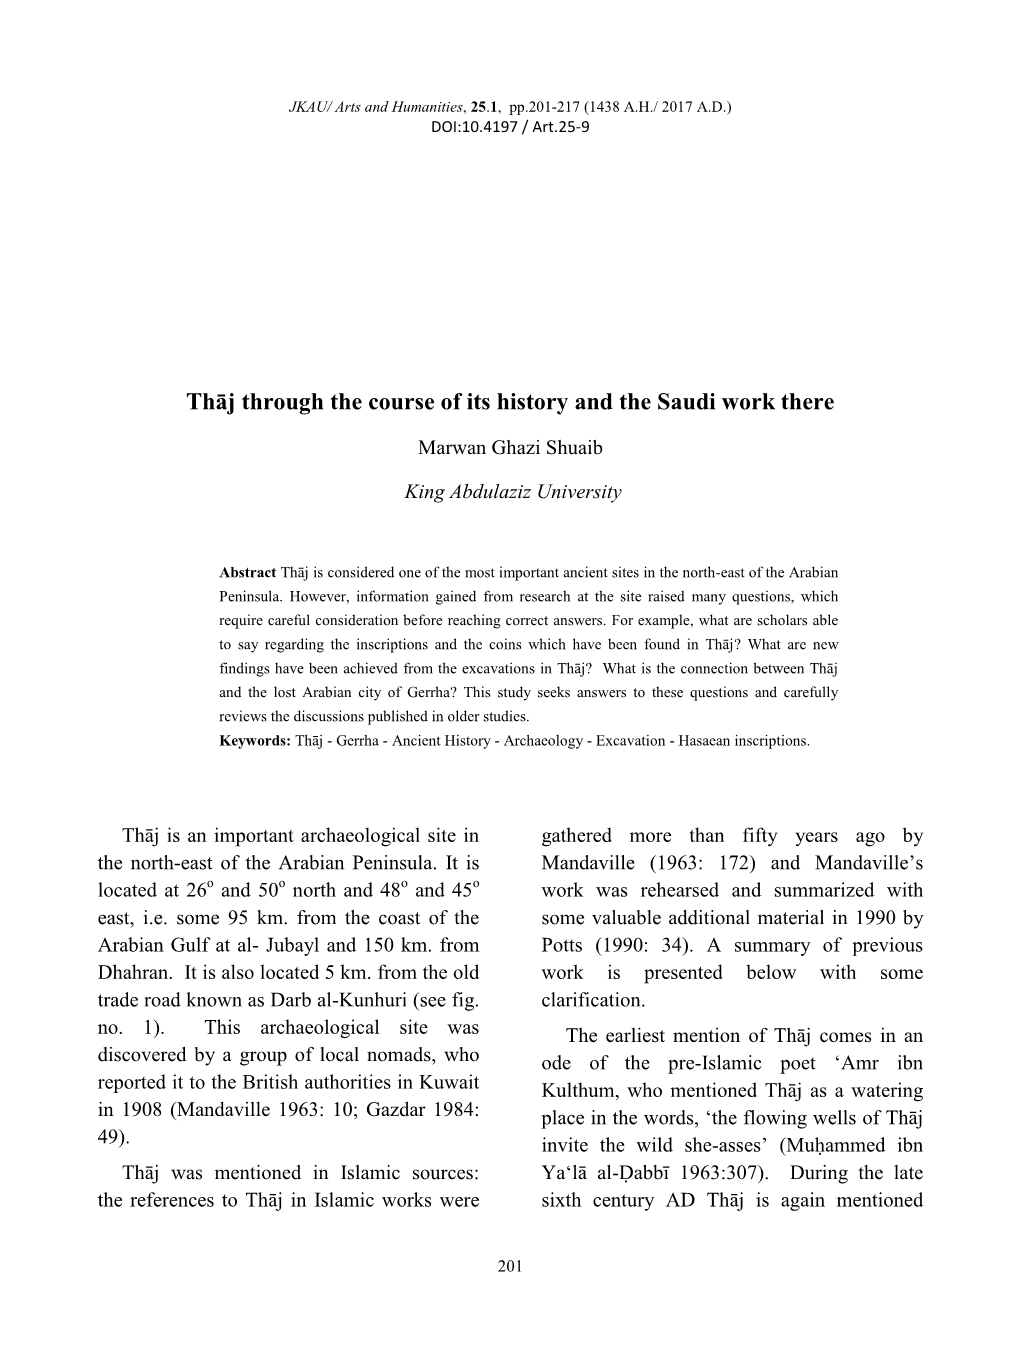 Thāj Through the Course of Its History and the Saudi Work There